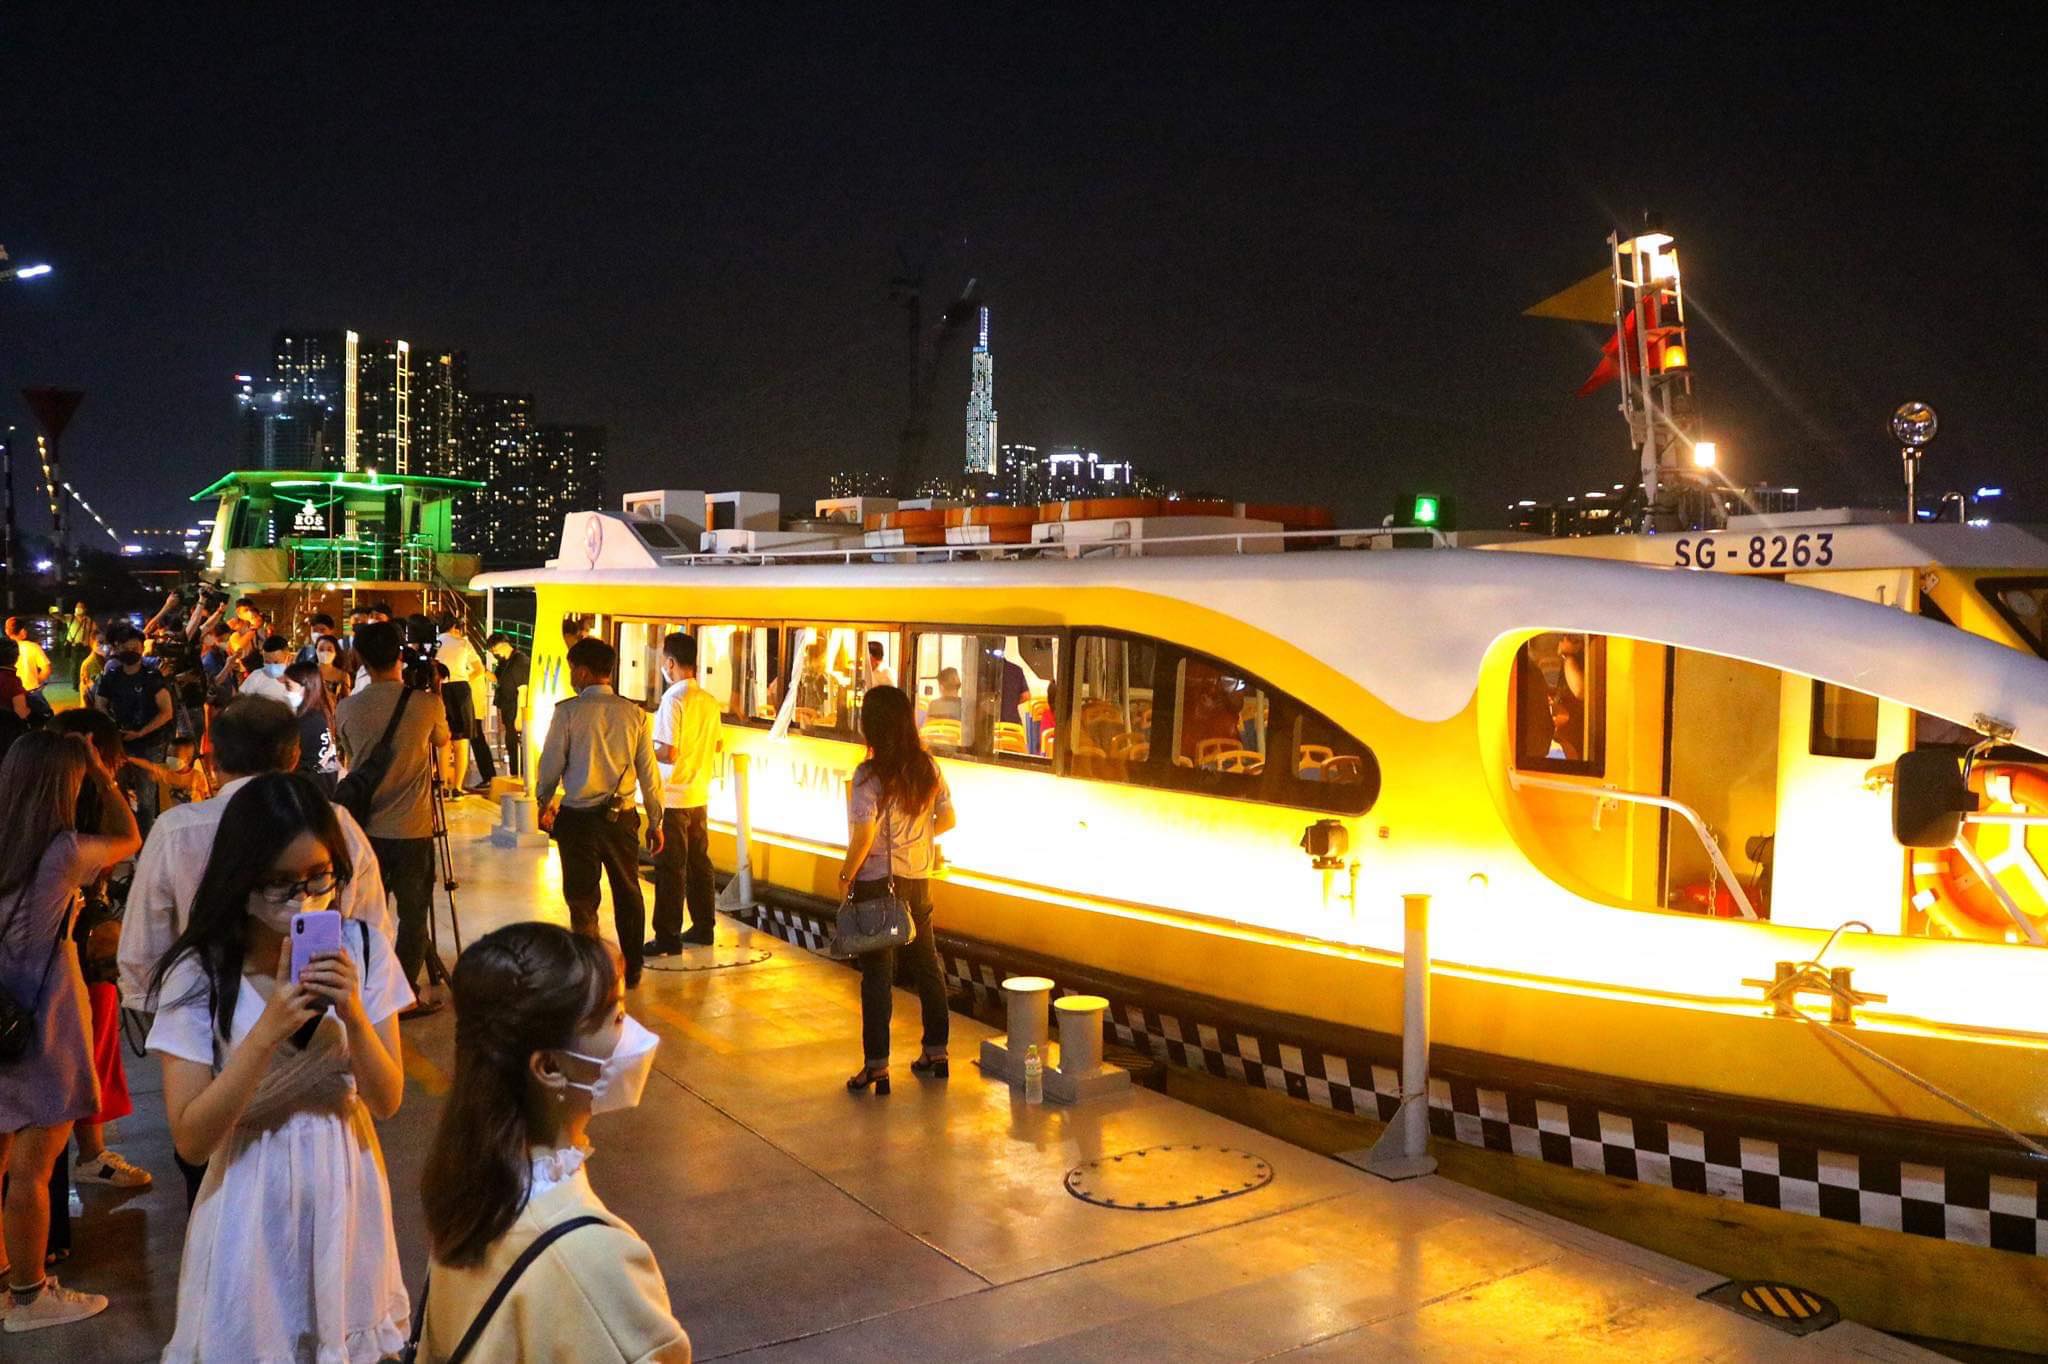 Ho Chi Minh City night water bus tickets sell like hot cakes on debut day